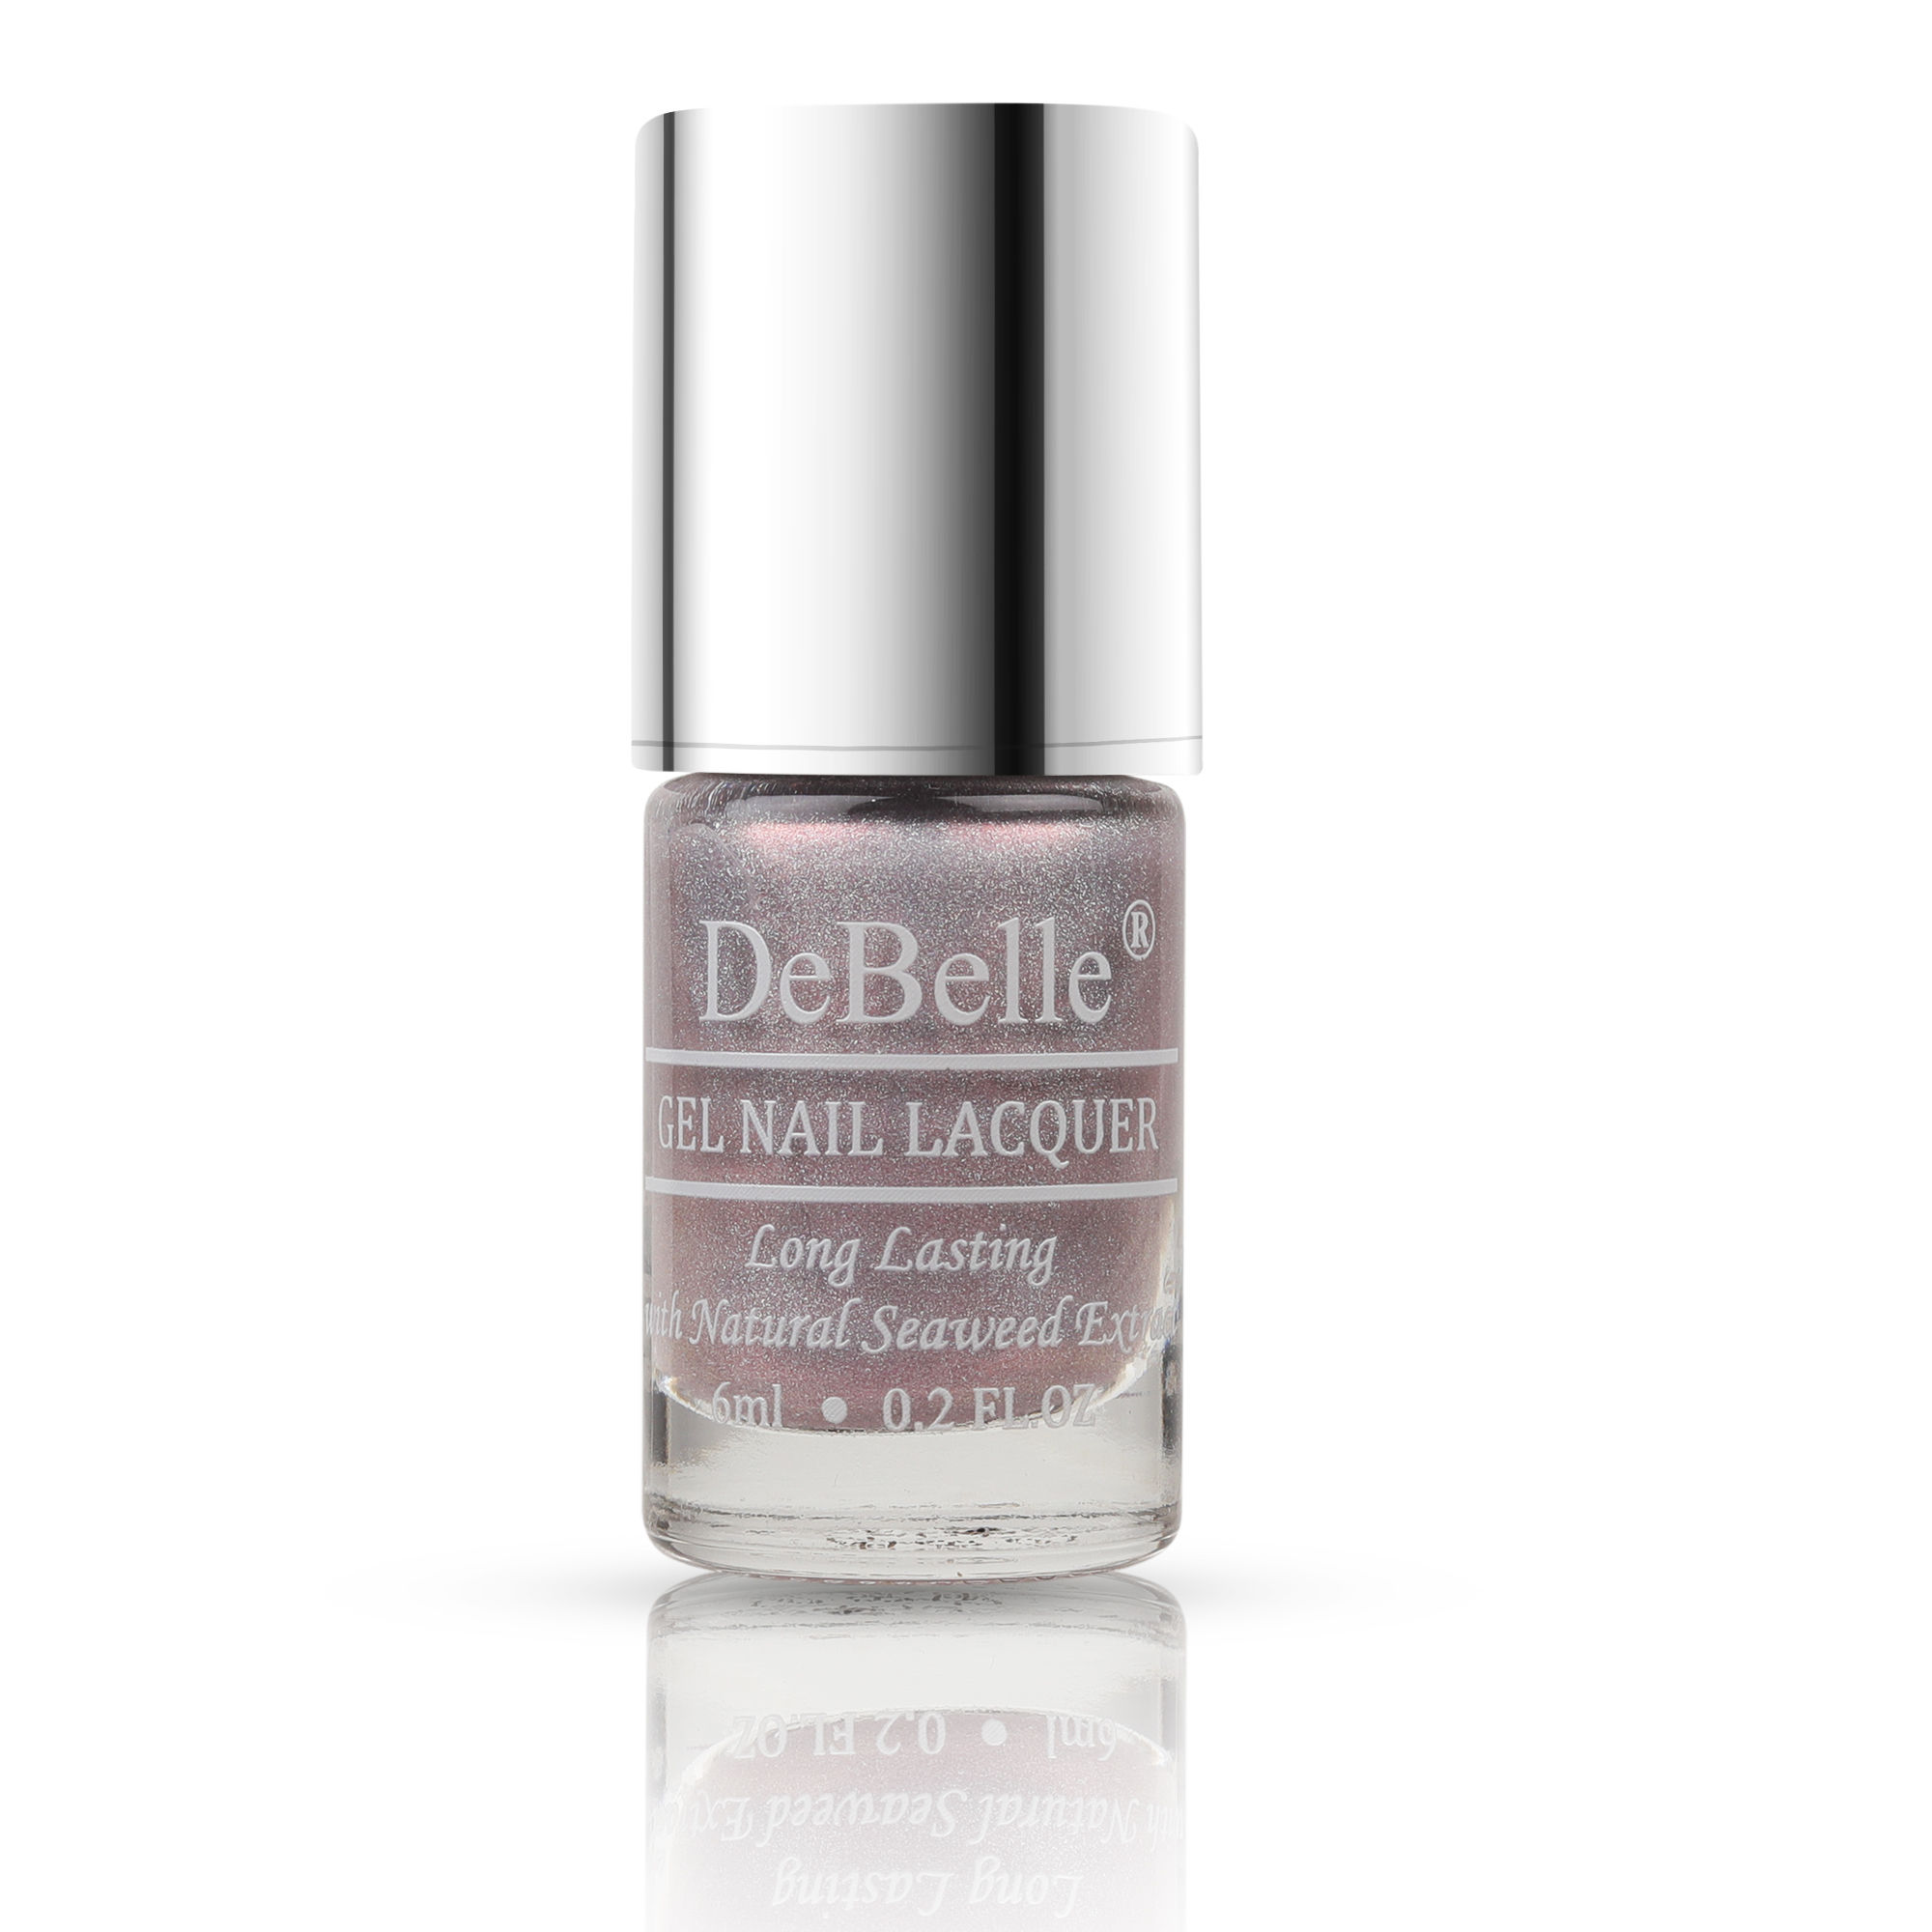 DeBelle Gel Nail Lacquer - Viola Dew Reviews Online | Nykaa